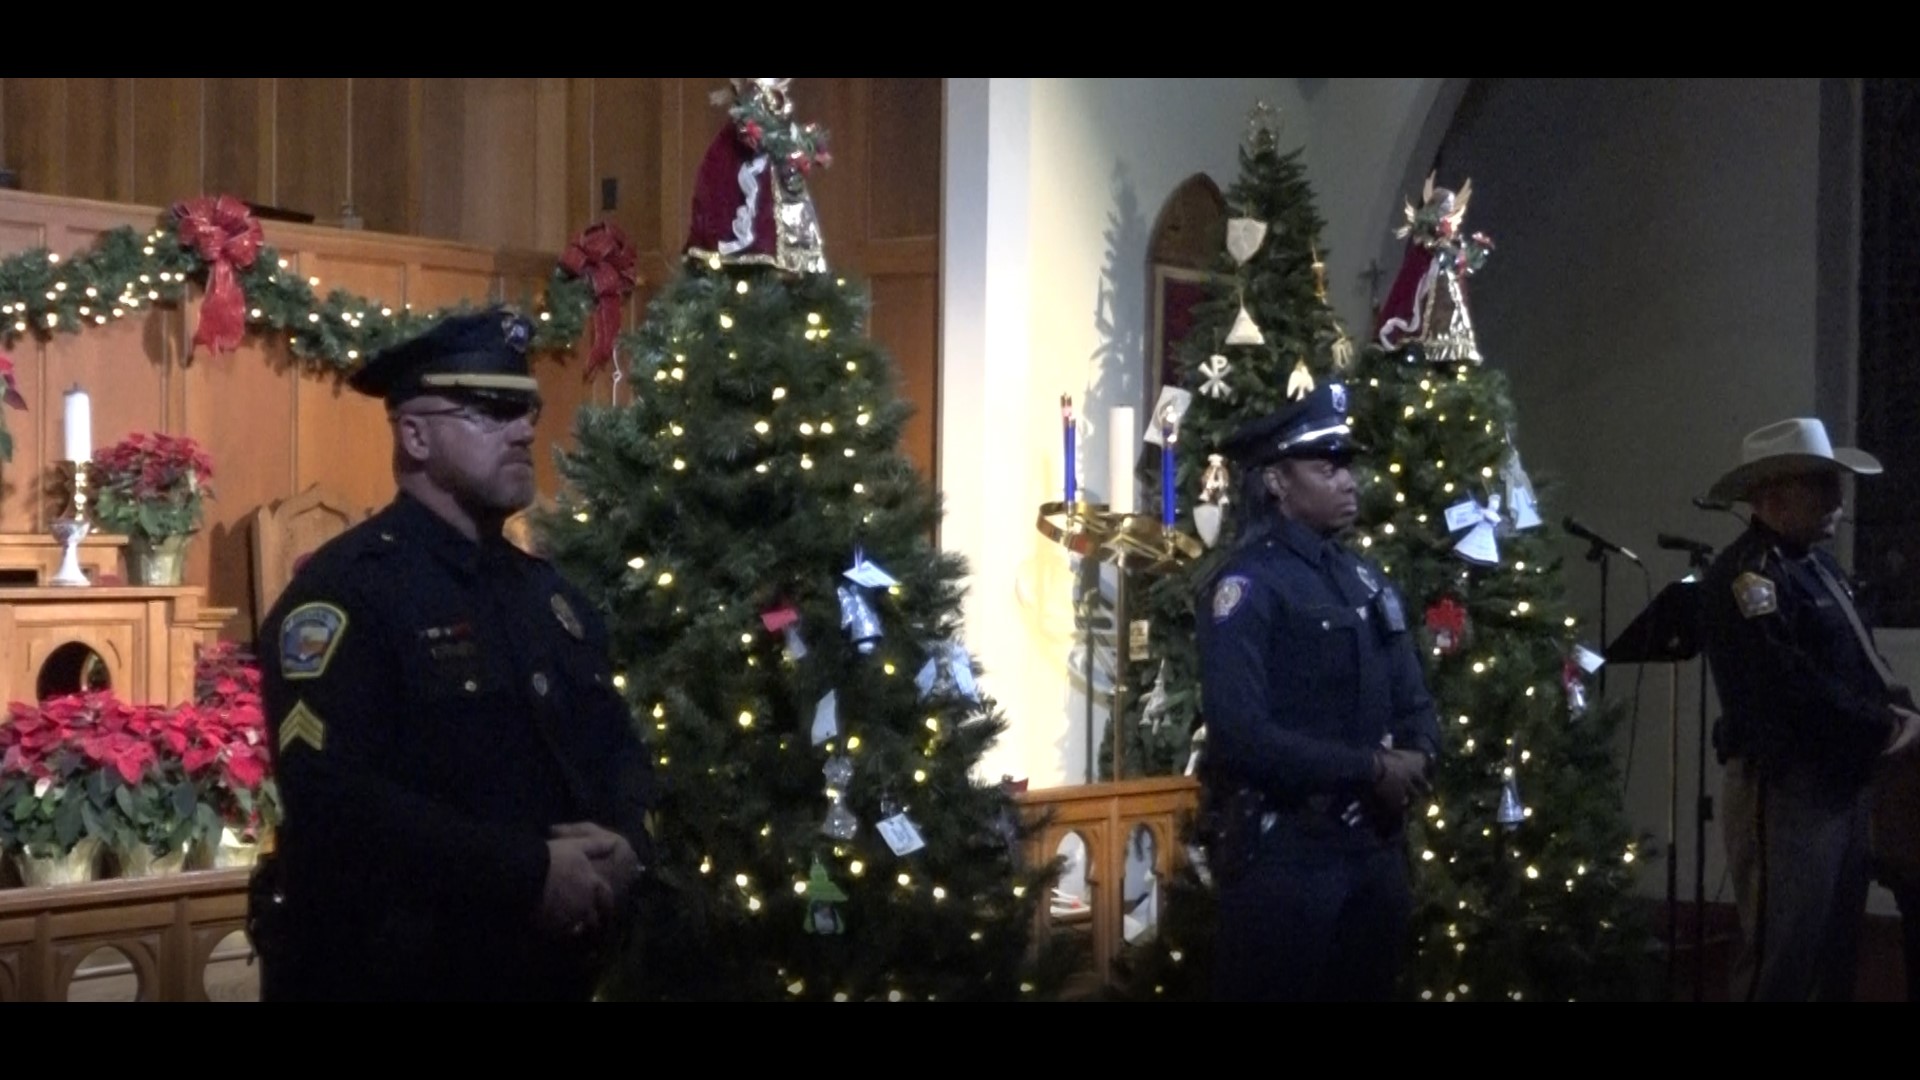 The Brazos county district attorney's office hosted the 19th annual Tree of Angels ceremony.